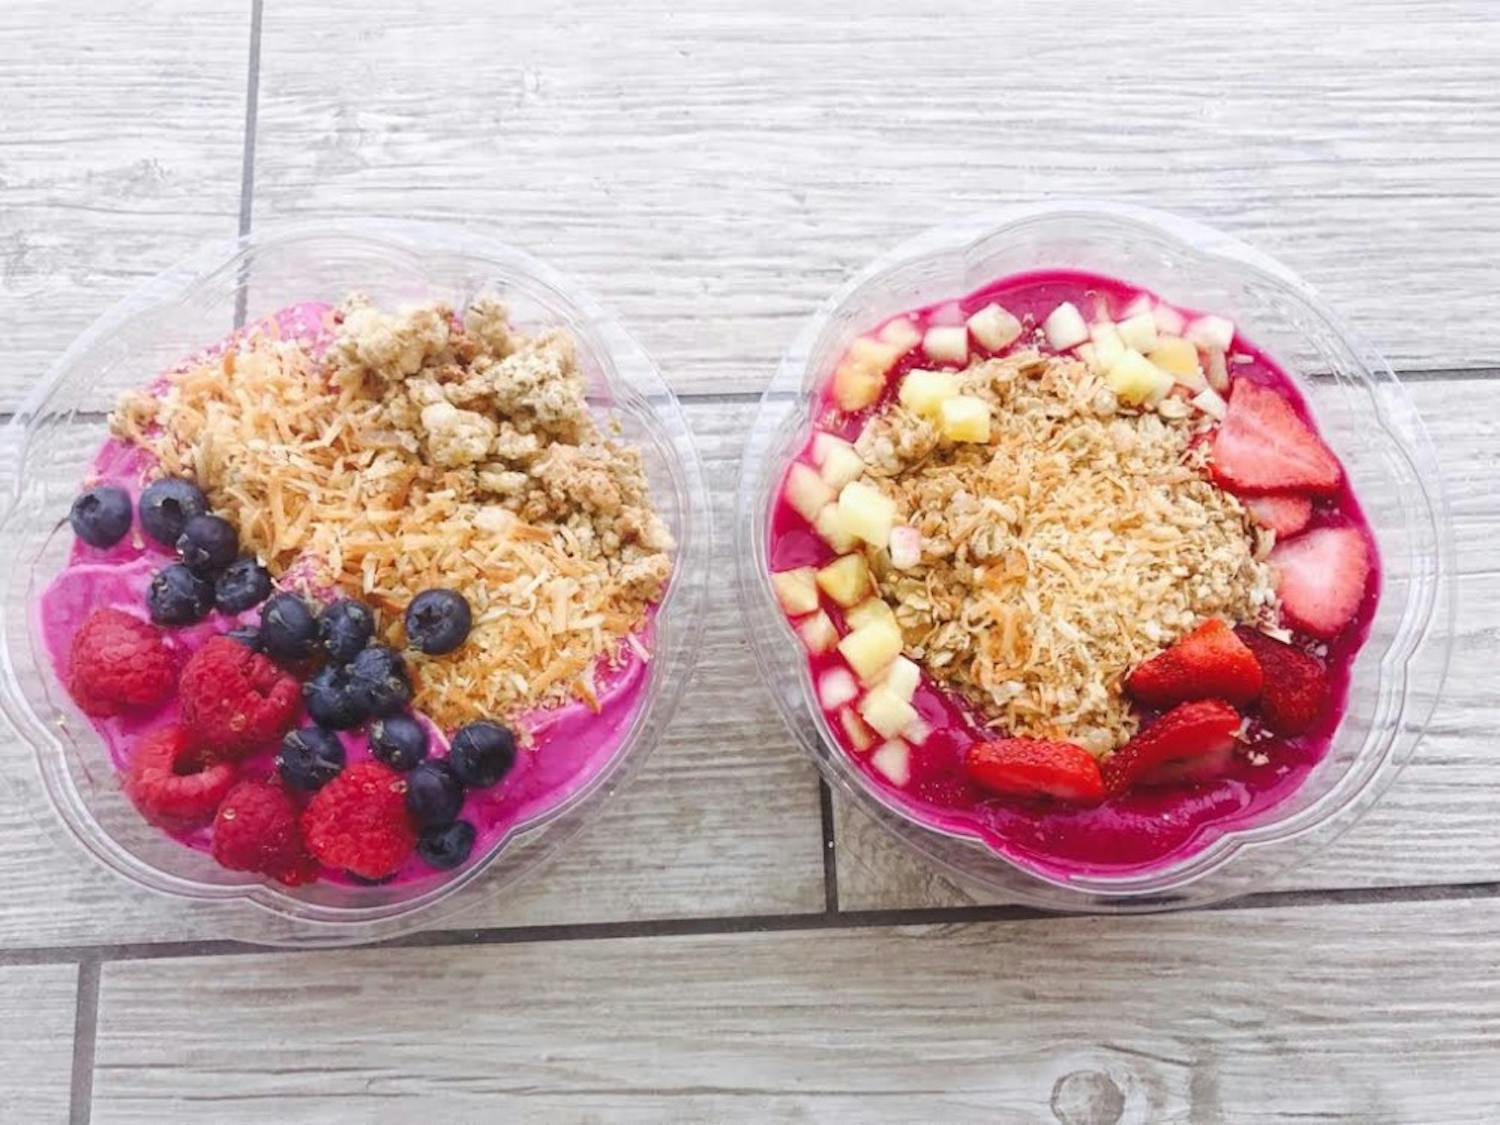 (Pictured) The&nbsp;Barbie Girl acai bowl from&nbsp;Squeeze Juicery, located at 5419 Main St., Williamsville